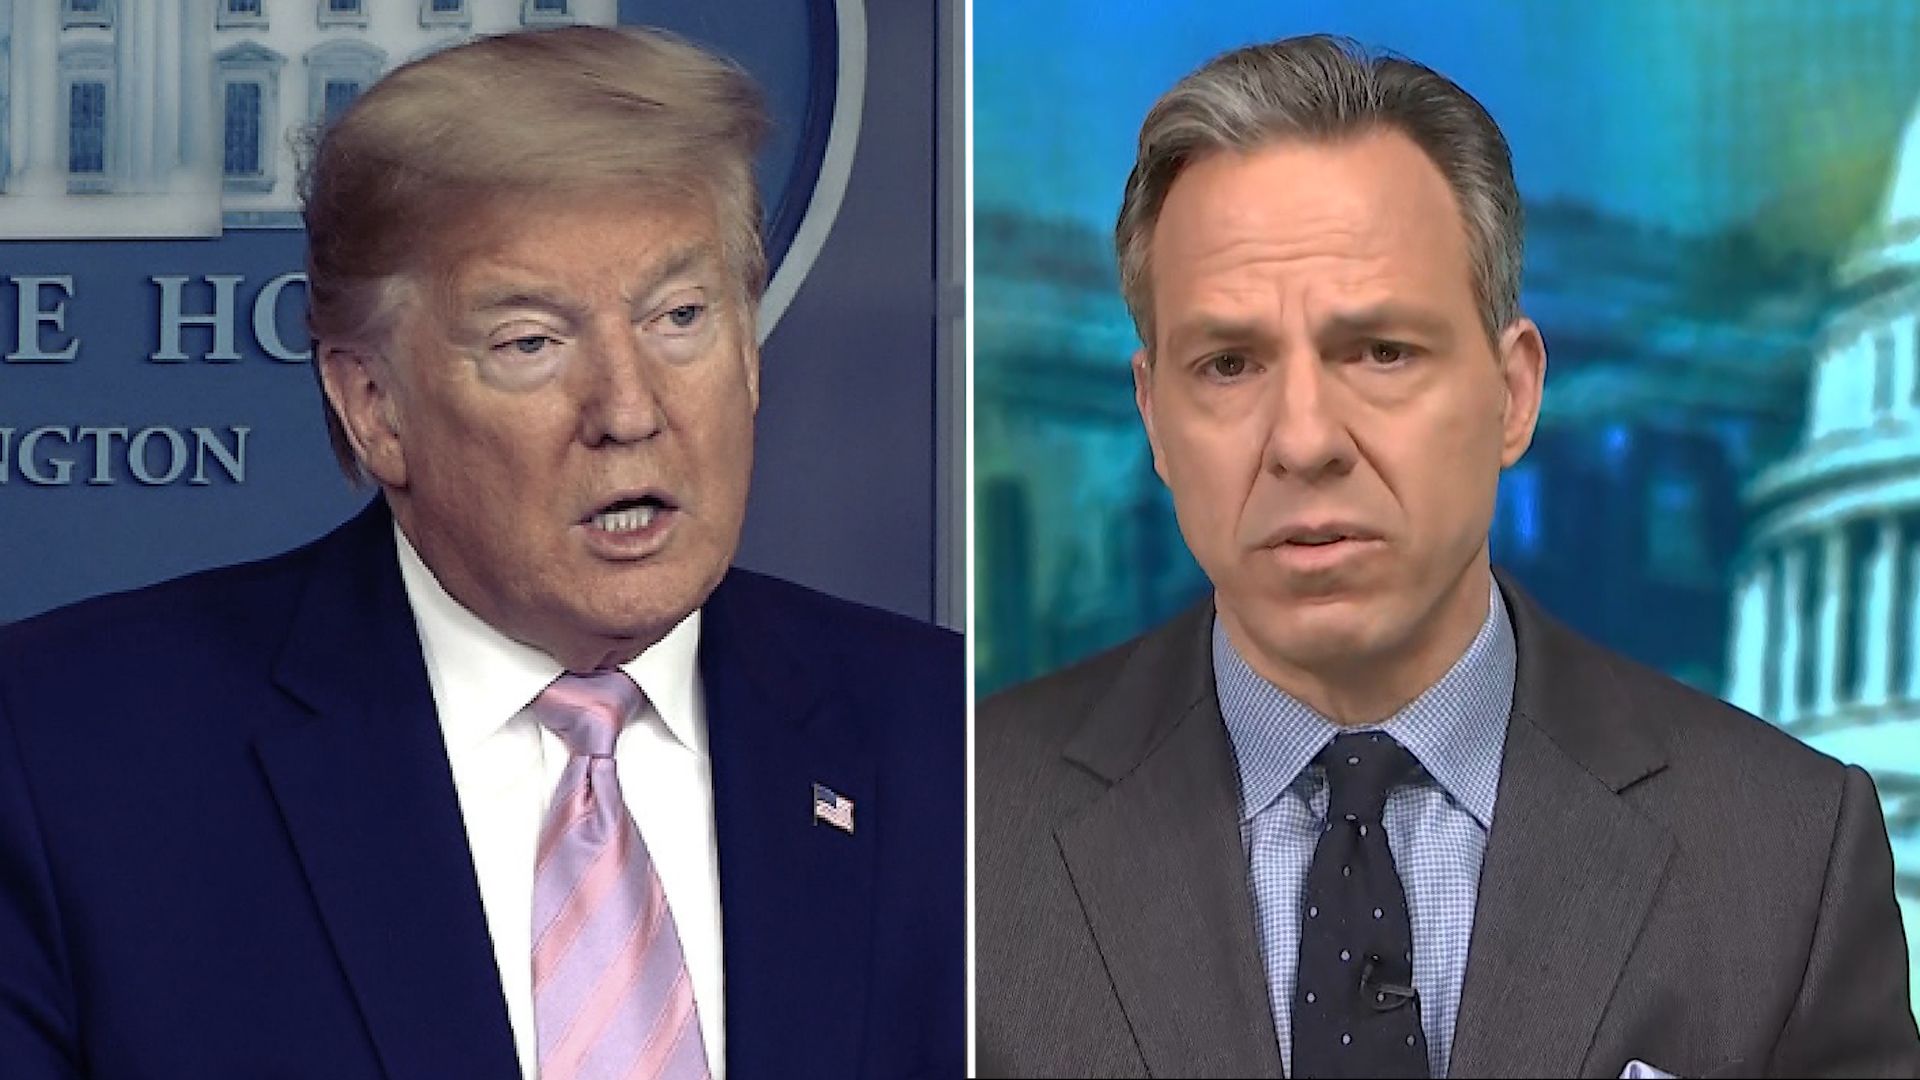 CNN's Jake Tapper: Trump Pulled a 'Political Rick-Roll' on the Press